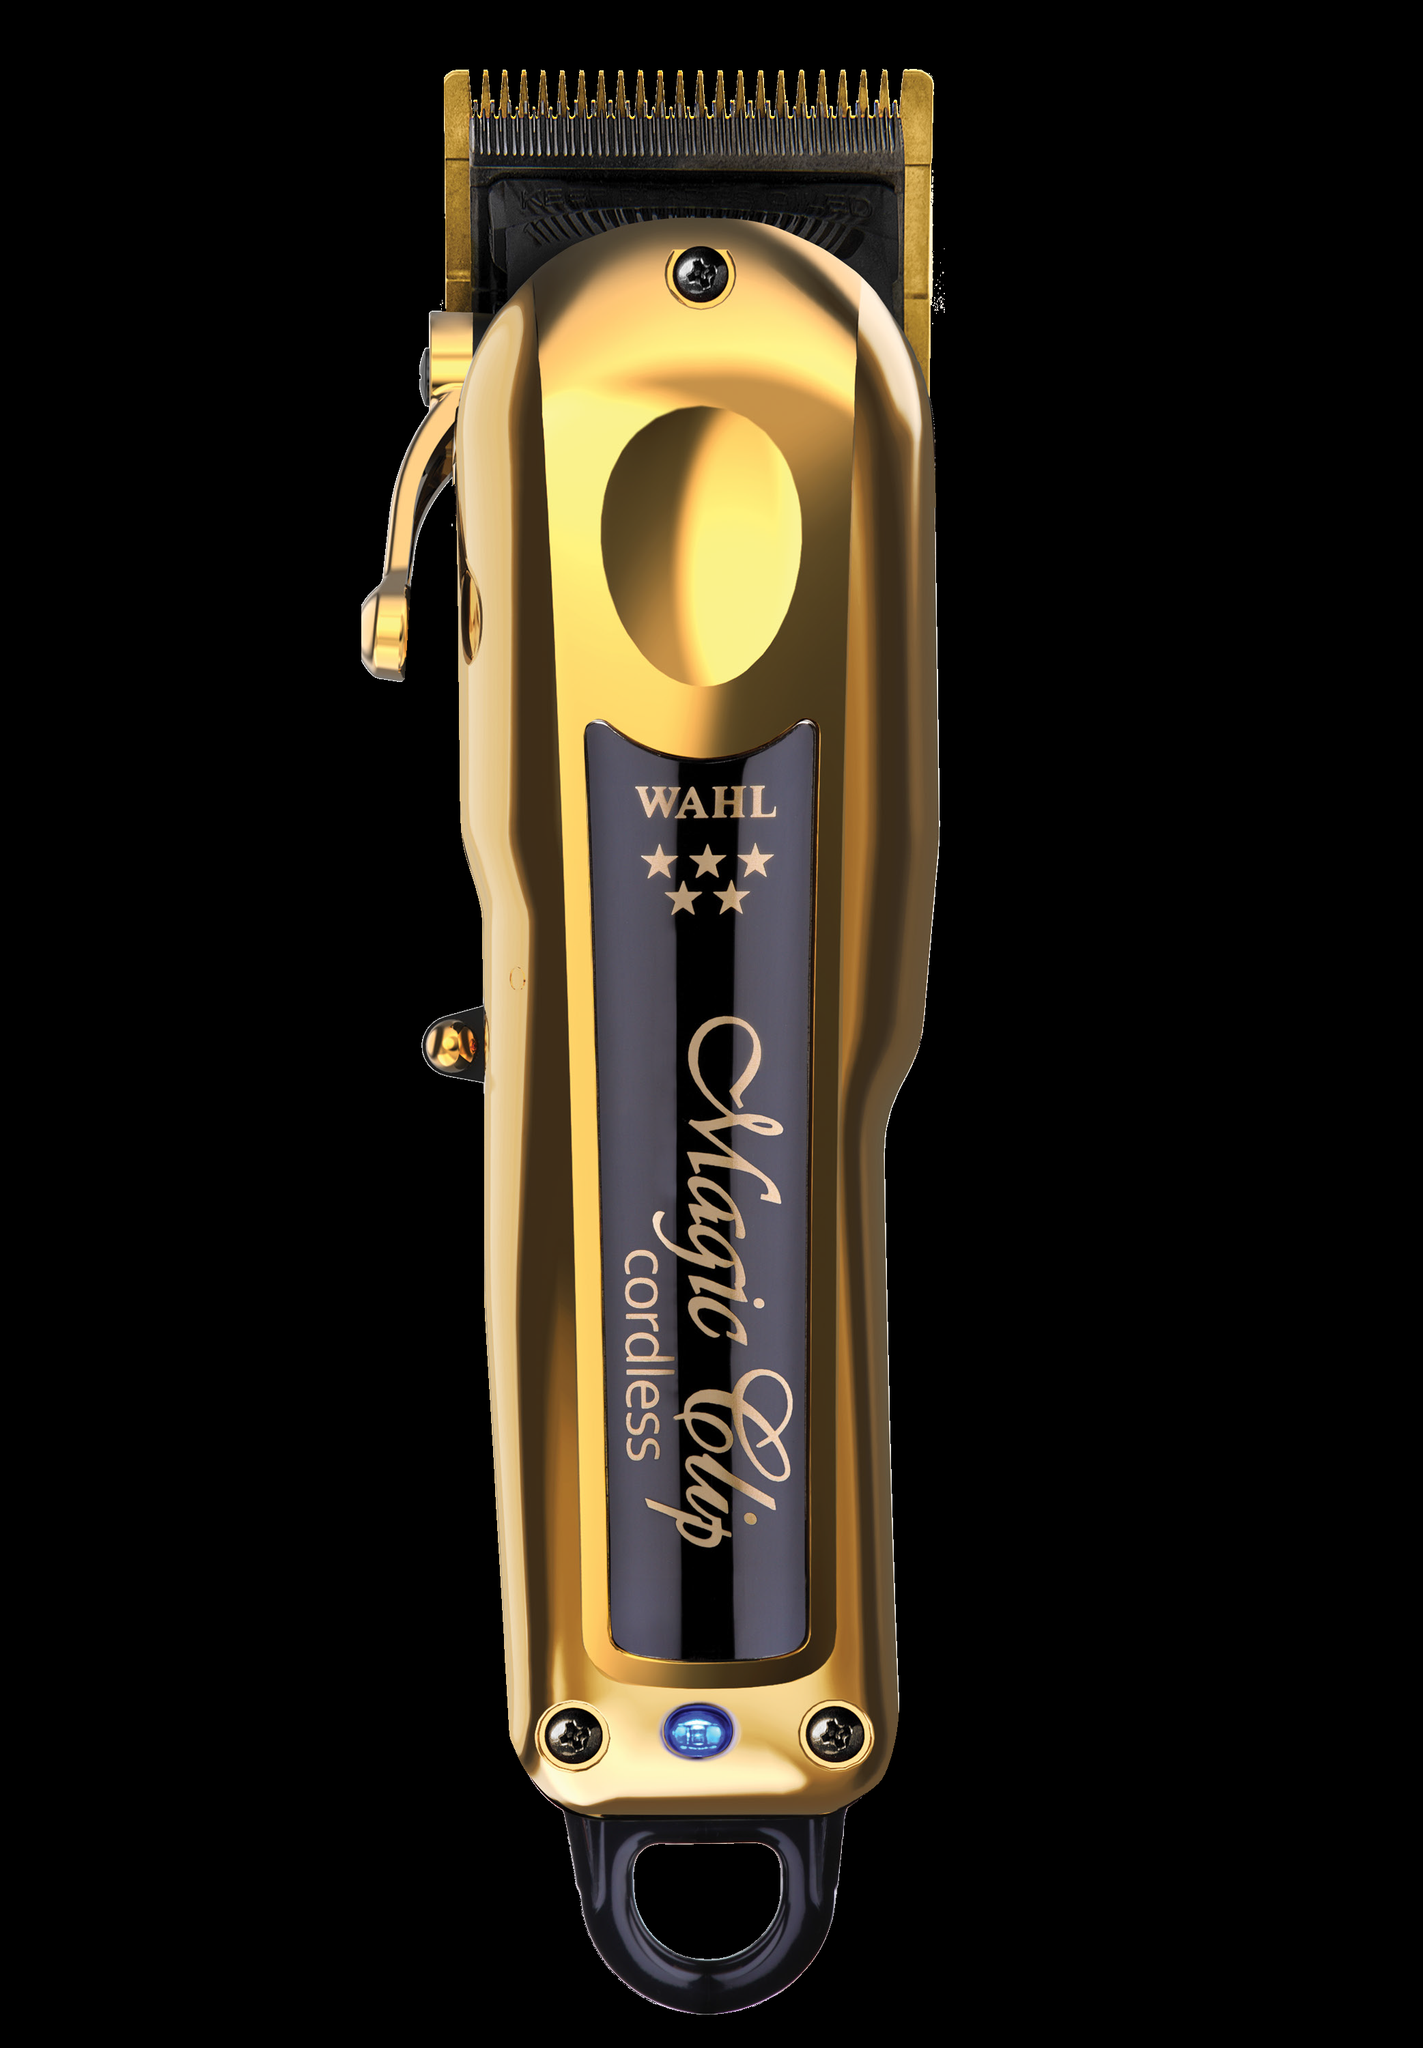 Wahl Professional 8148 5-Star gold